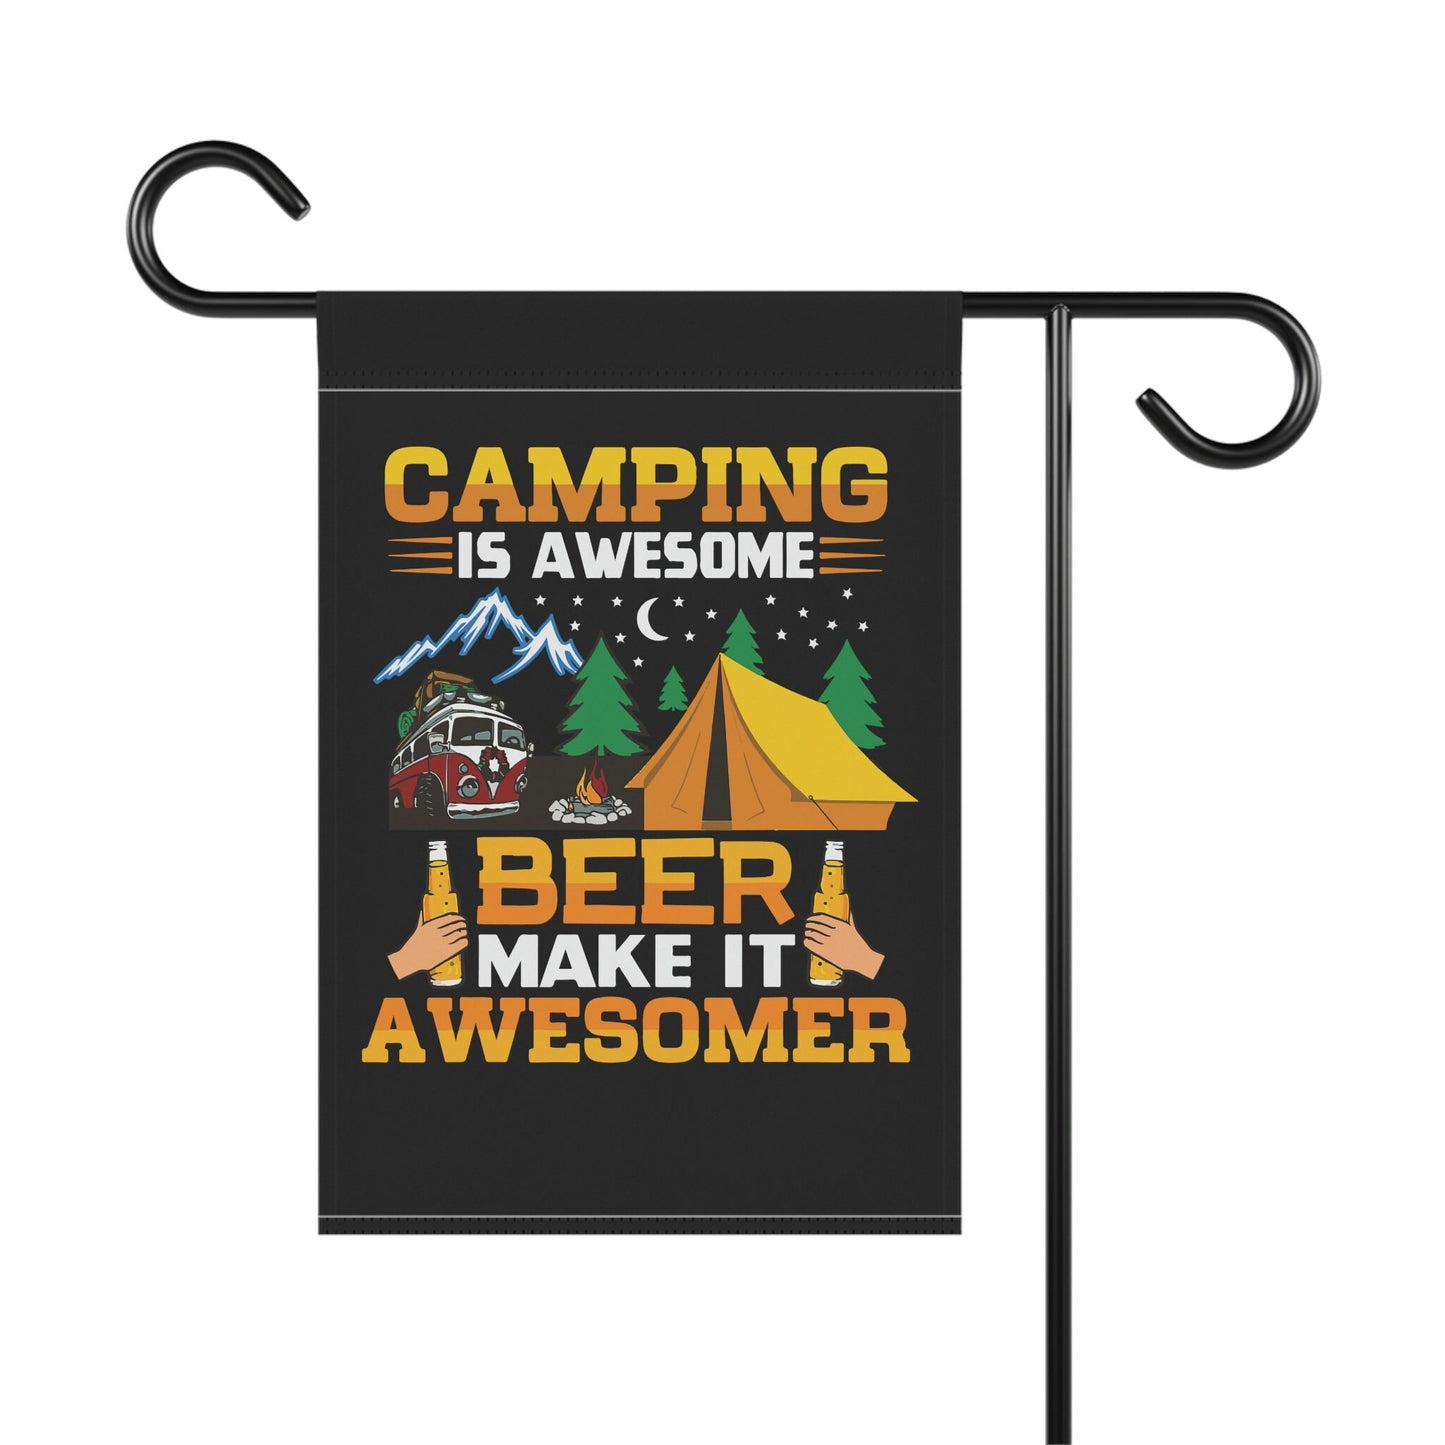 Camping is Awesome, Beer Makes it Awesomer, Camping, Garden, House Flag / Banner (Does not include holder)